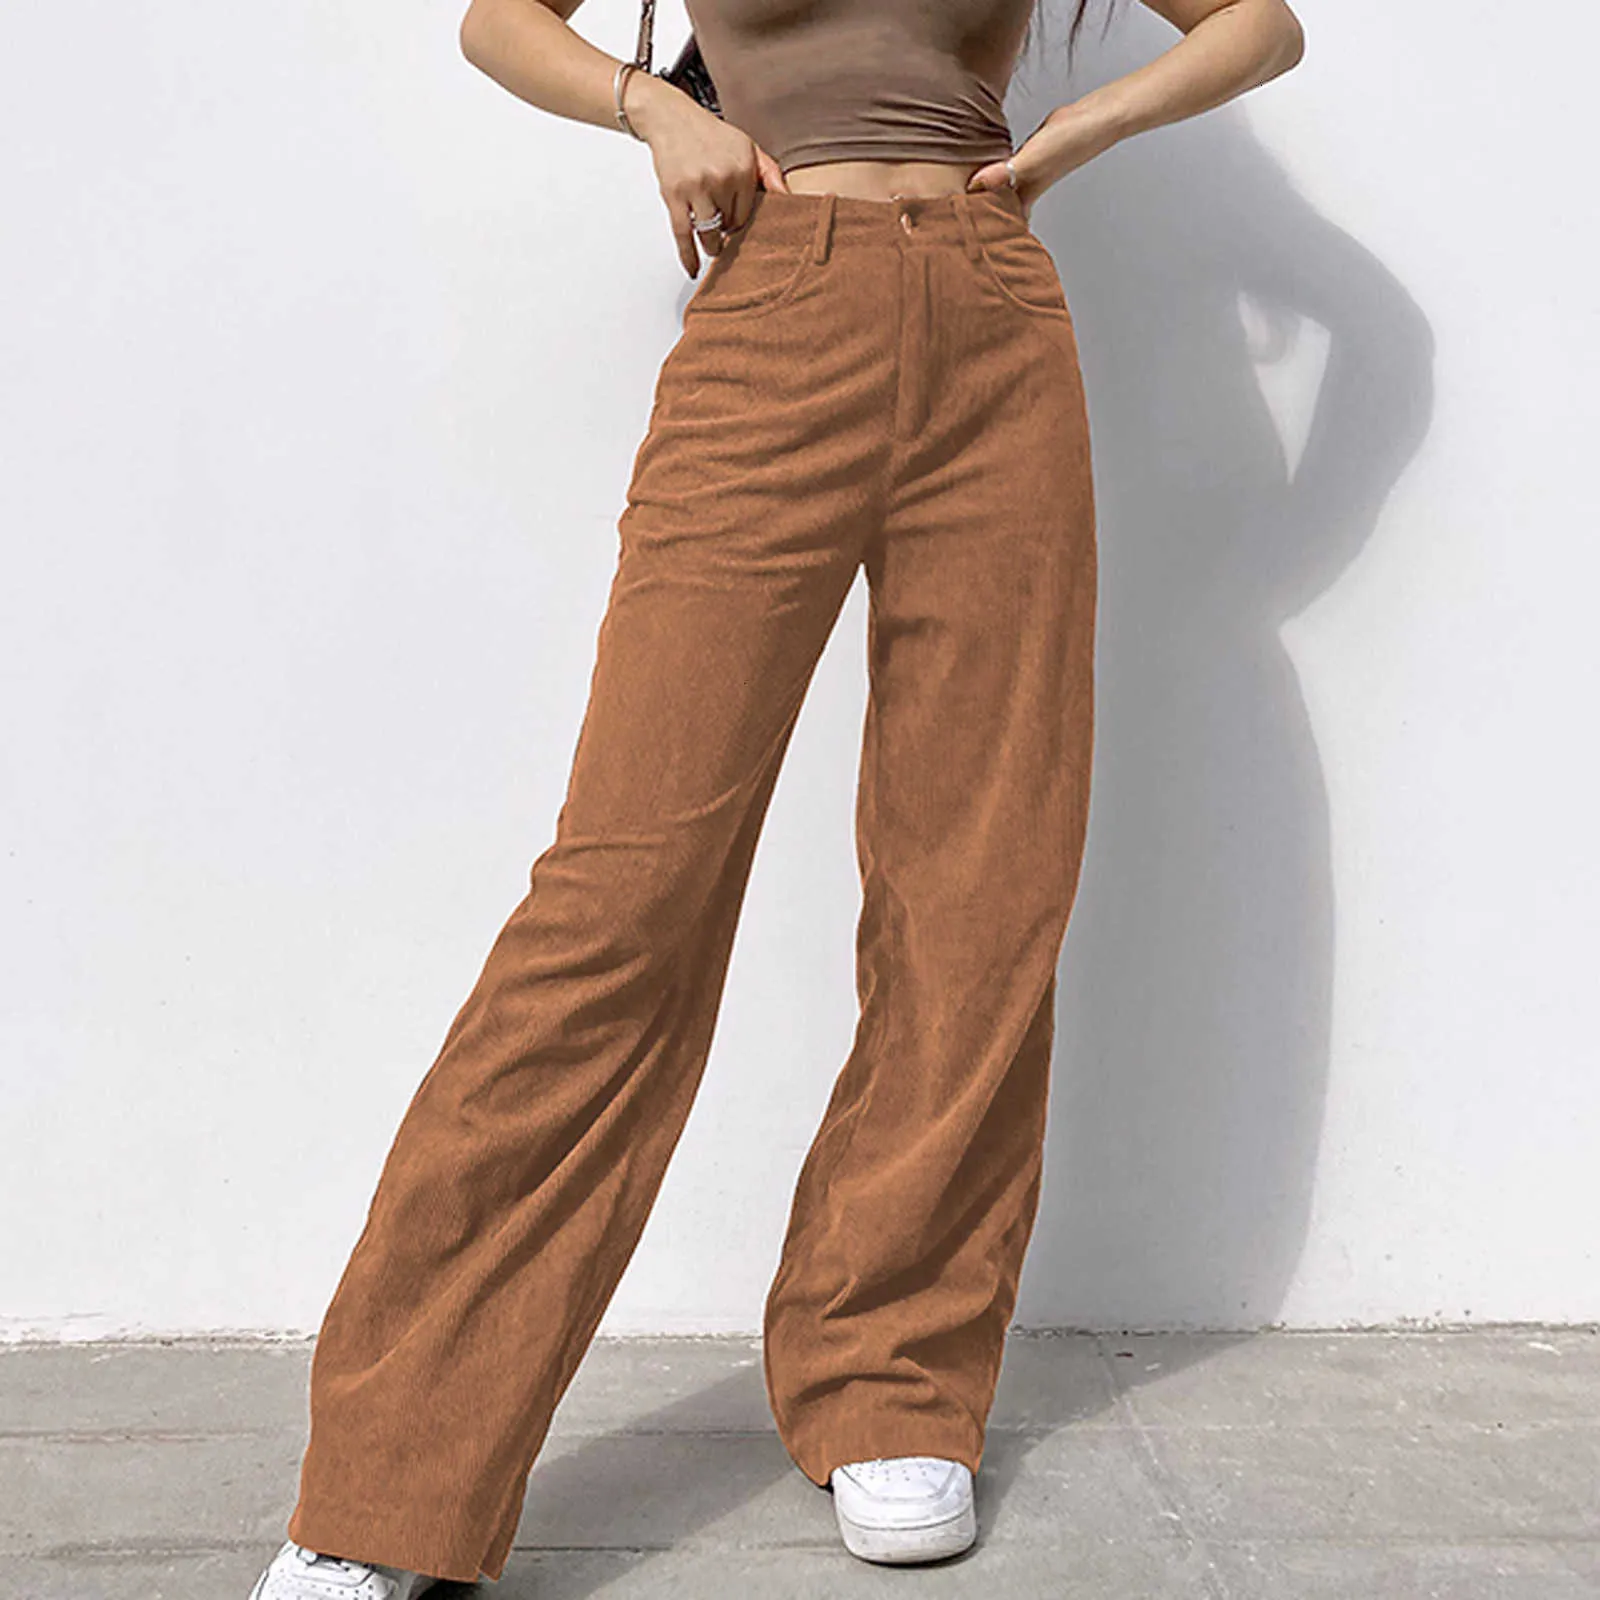 90s Indie Streetwear Women Corduroy Vintage Teenager Skater Girl Style  Baggy Pants Fashion High Waist Brown Trousers From Andygames, $32.95